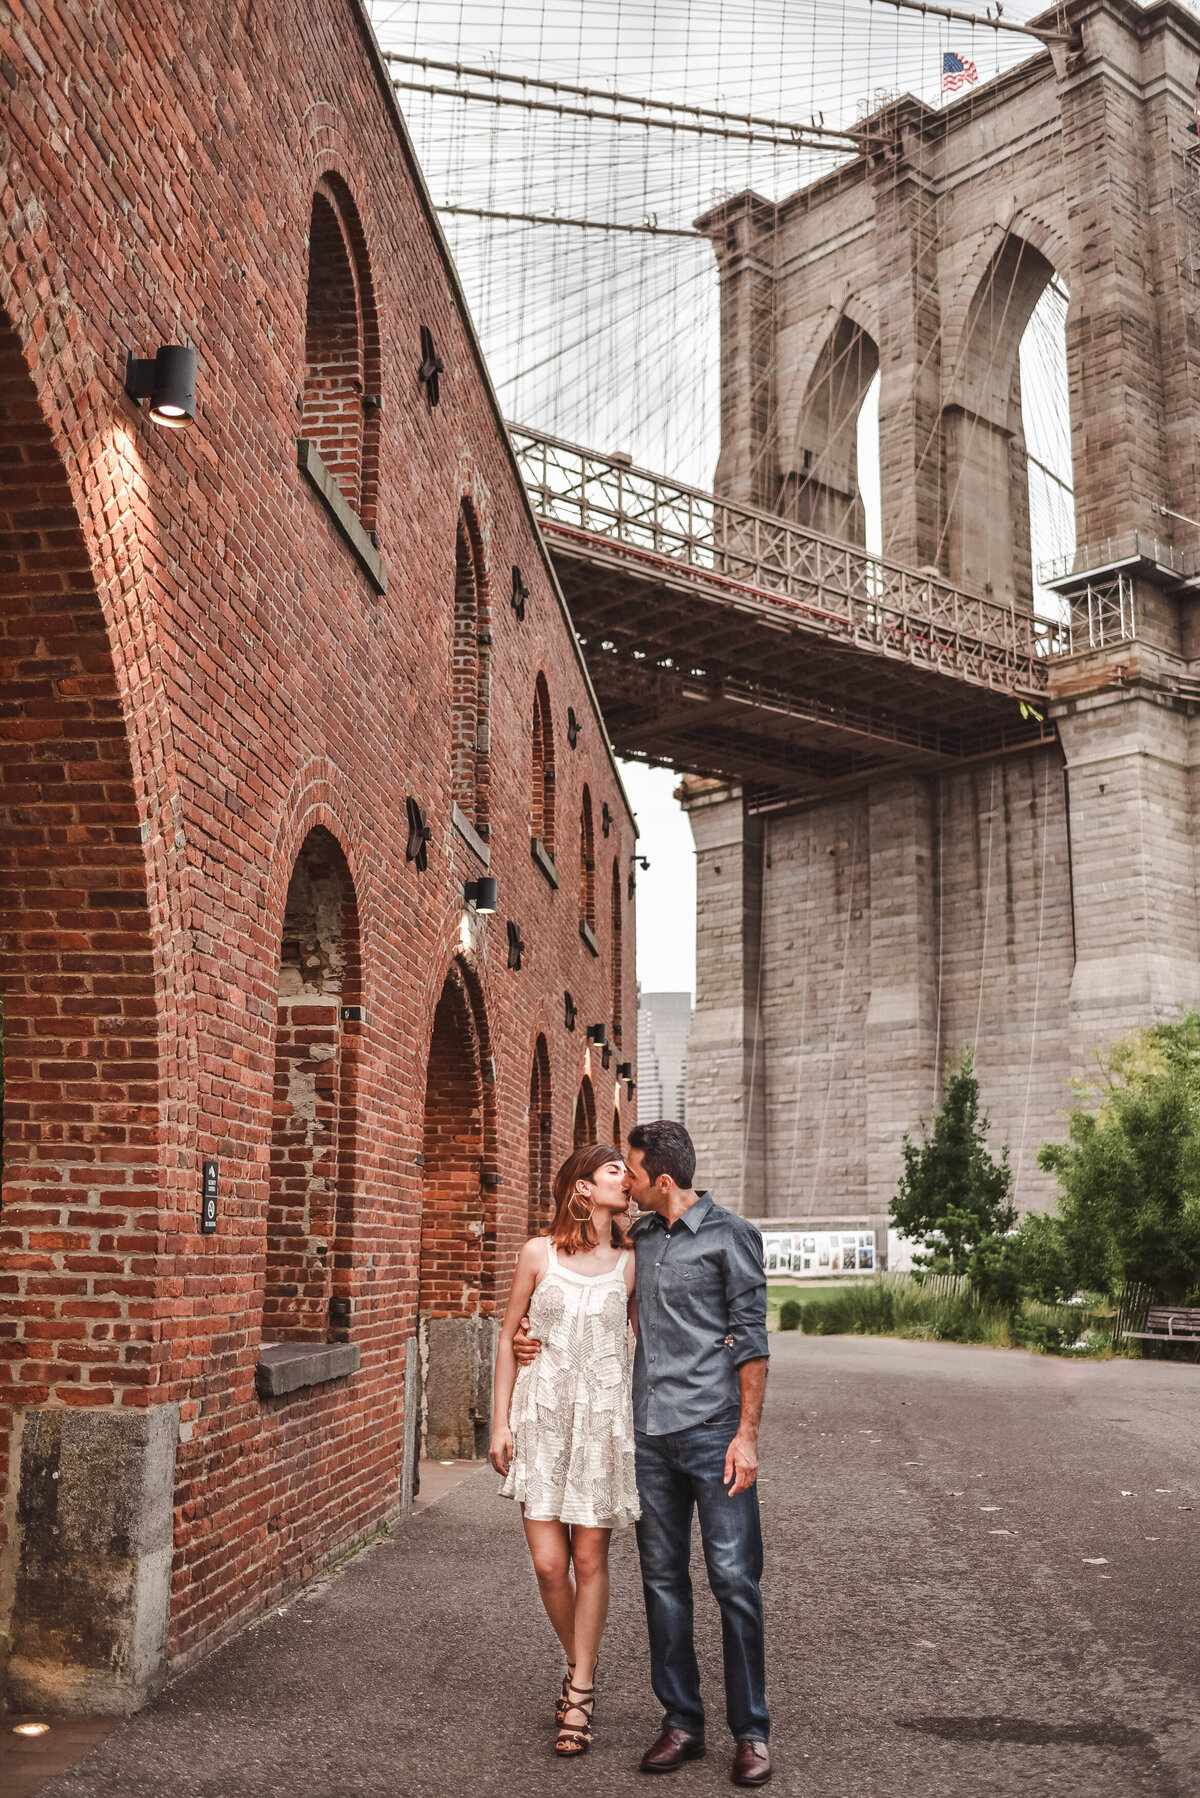 dumbo-brooklyn-engagement-photography-nyc-photographer-suessmoments (27 of 110)